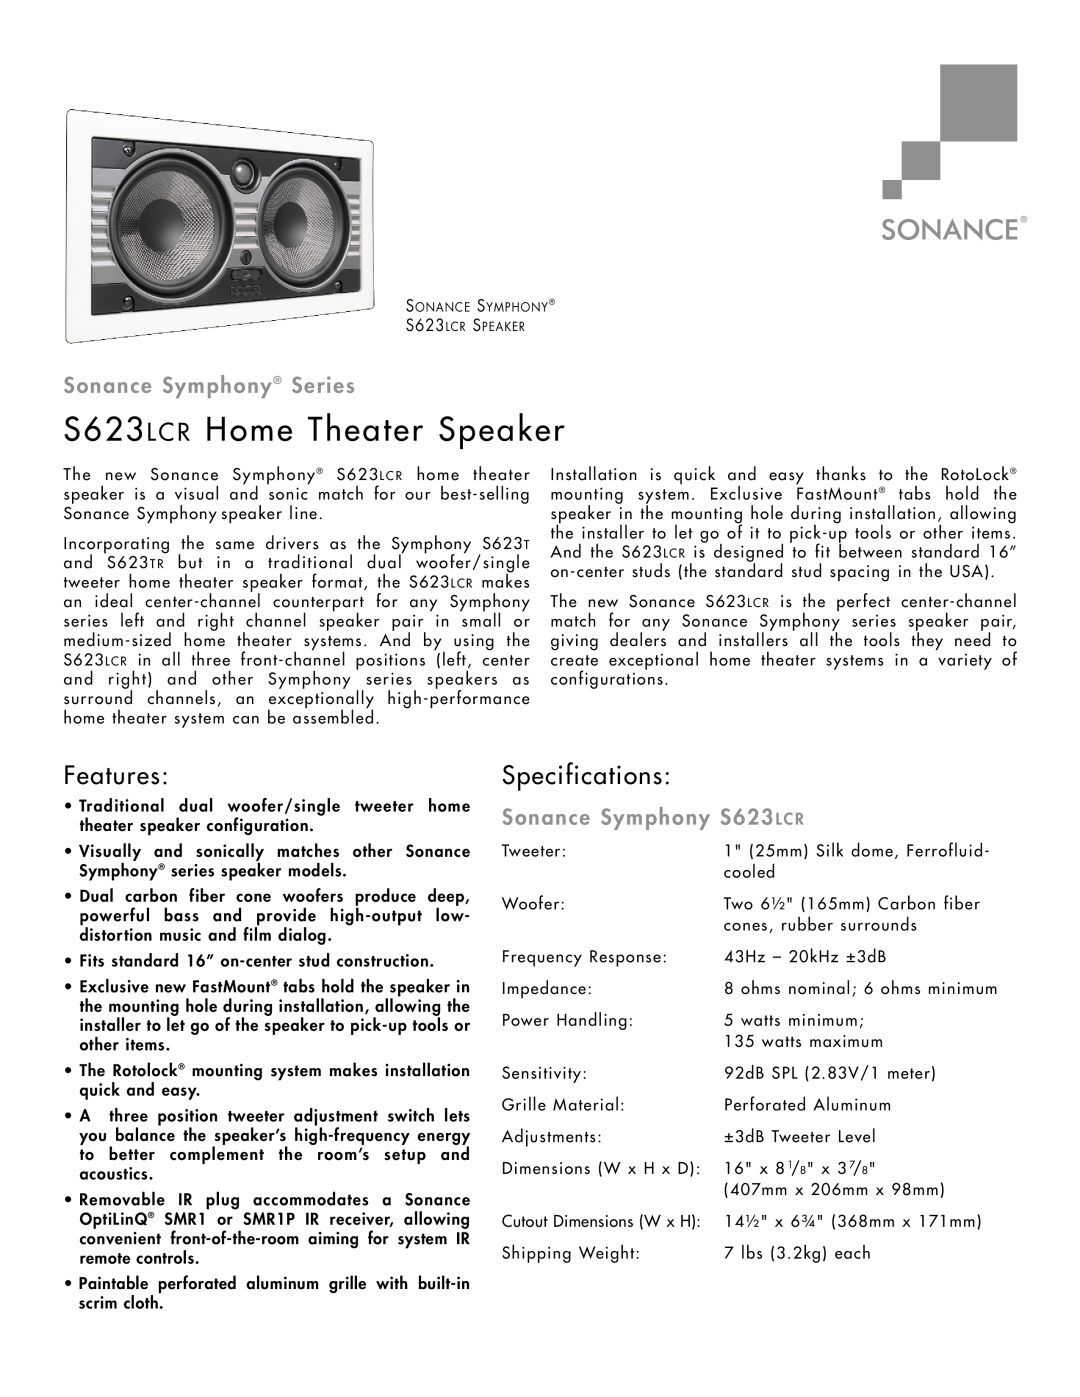 Sonance S623LCR specifications S623L C R Home Theater Speaker, Features, Specifications, Sonance Symphony Series 